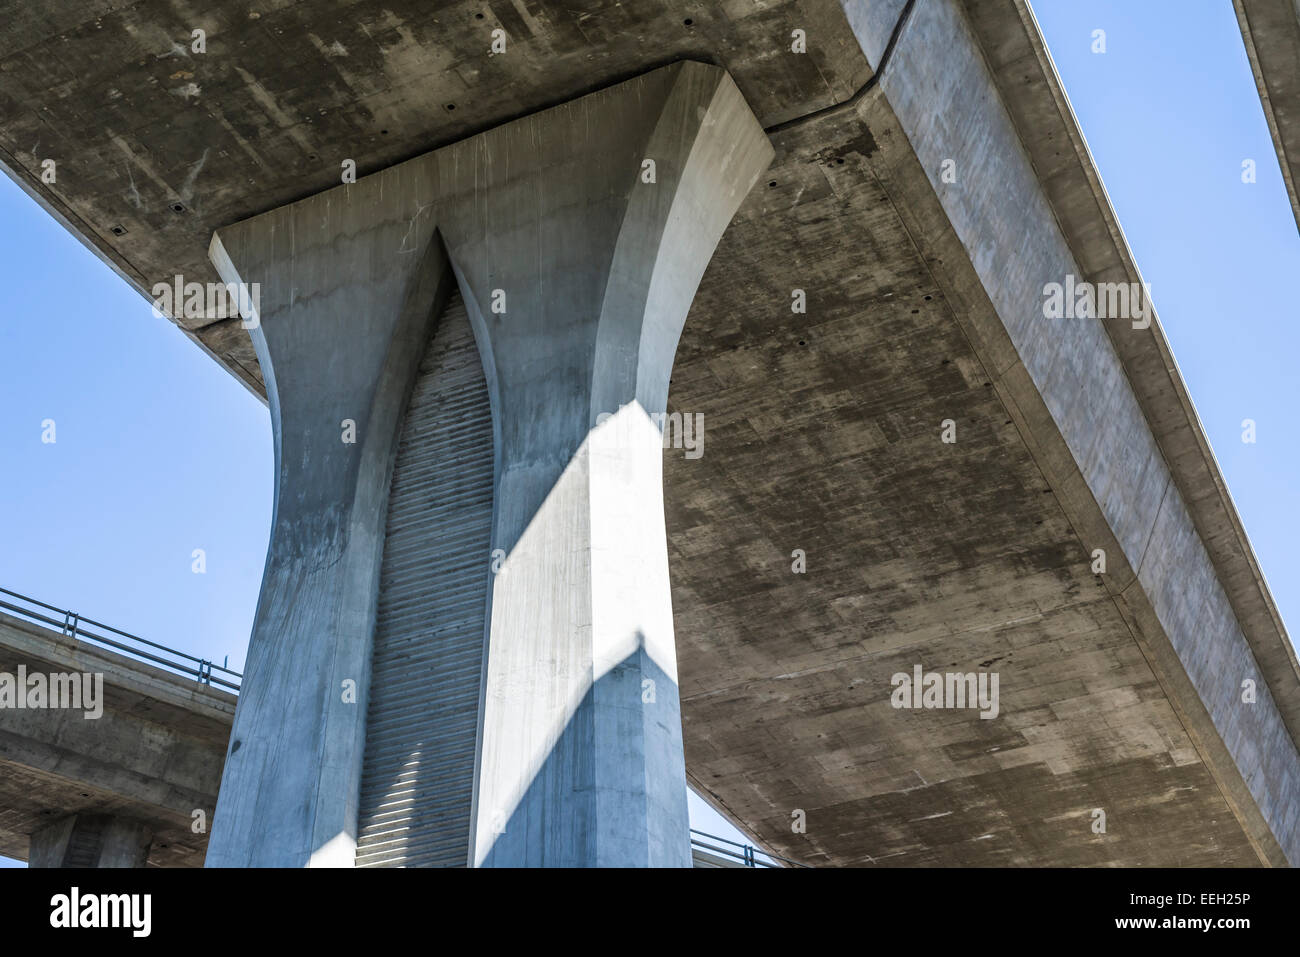 San Diego freeways and concrete structures. Abstract image. San Diego, California,  United States. Stock Photo